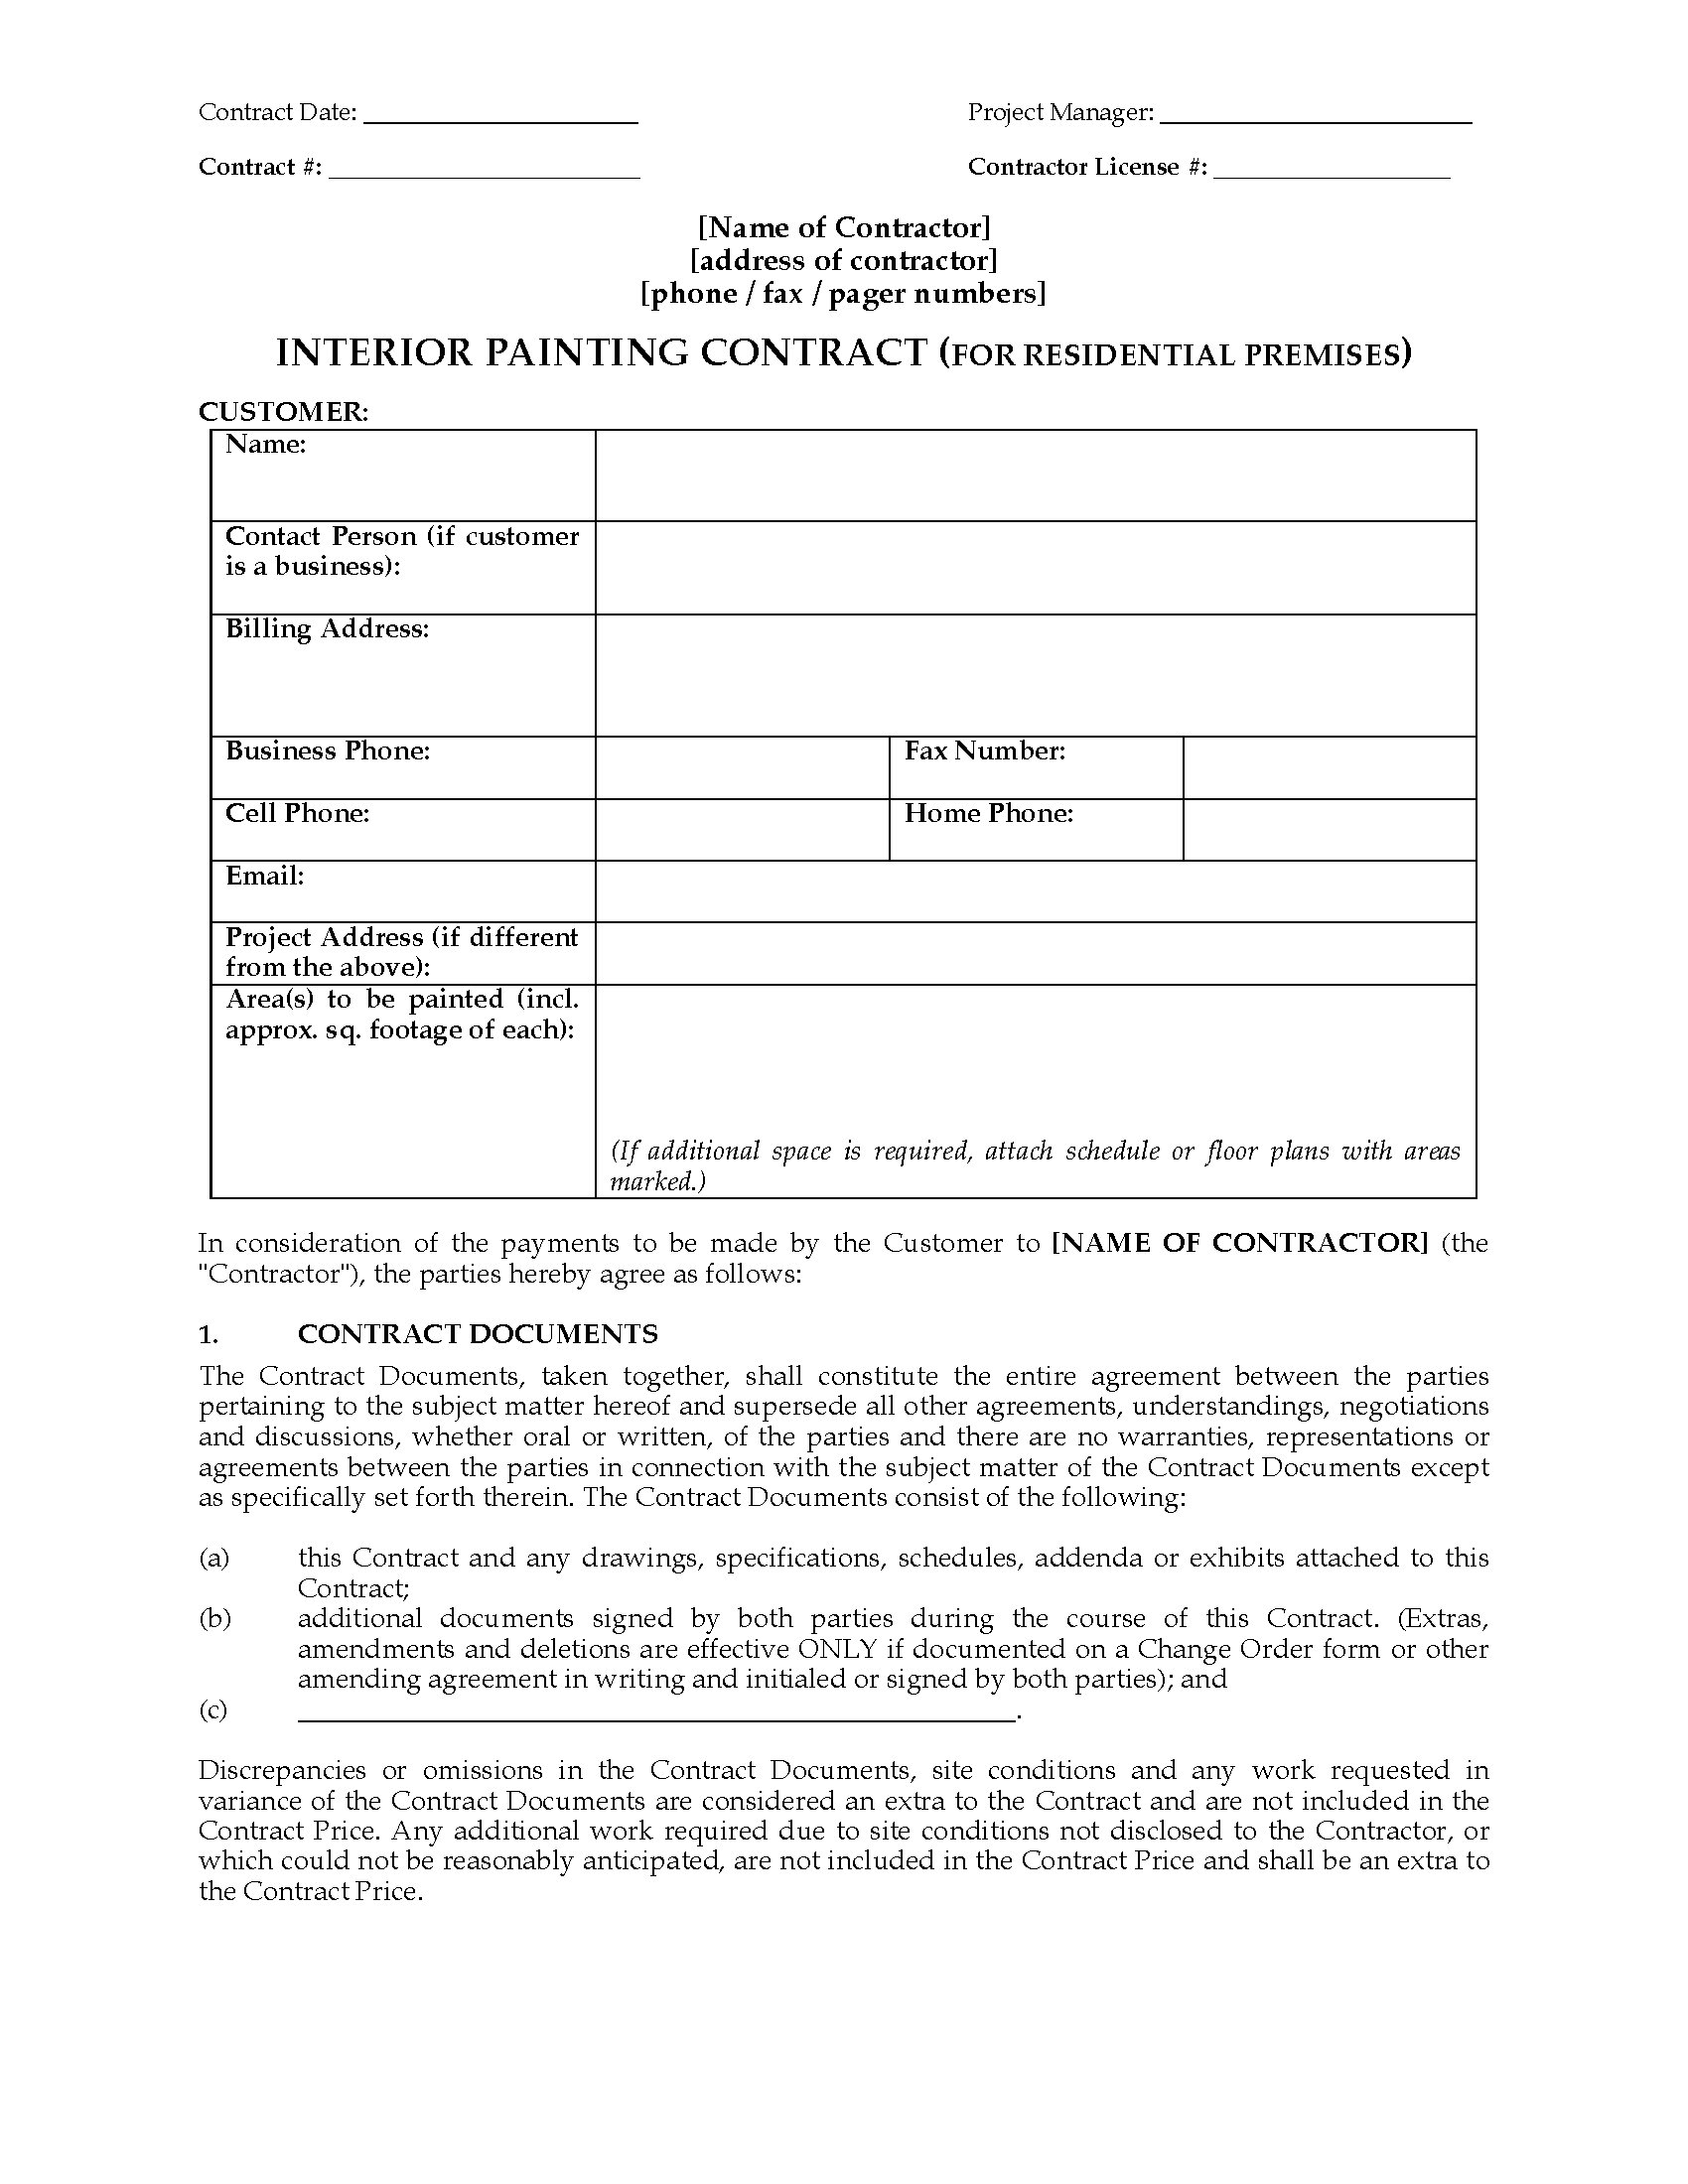 Interior Painting Contract Residential Legal Forms and Business